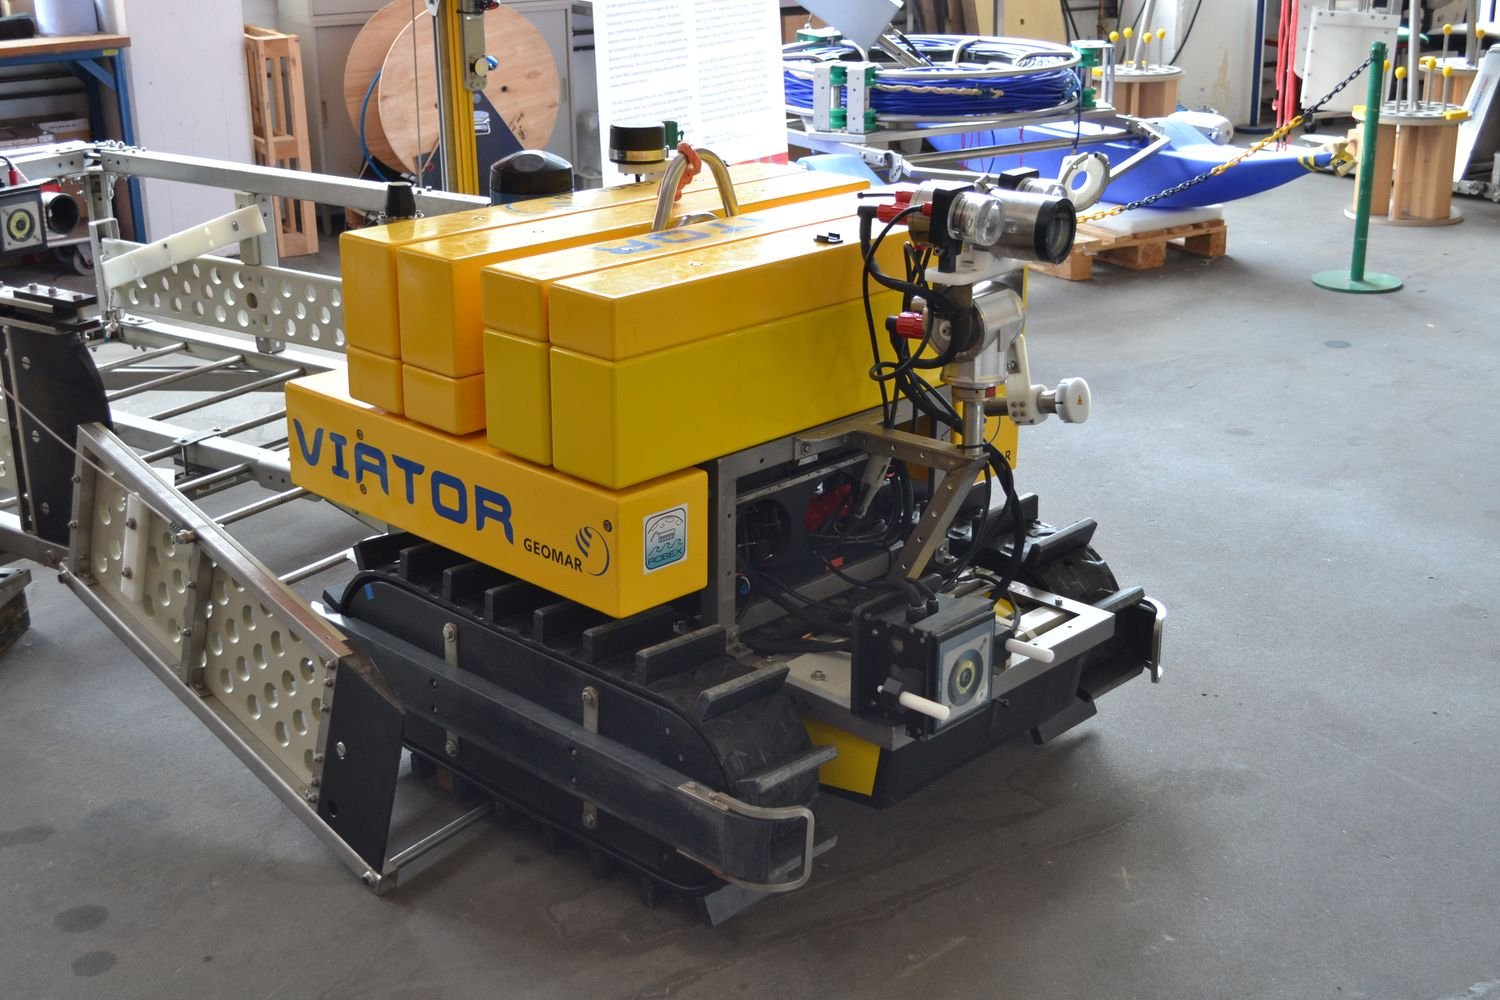 Deep-sea crawler "Viator" is being prepared for its next mission